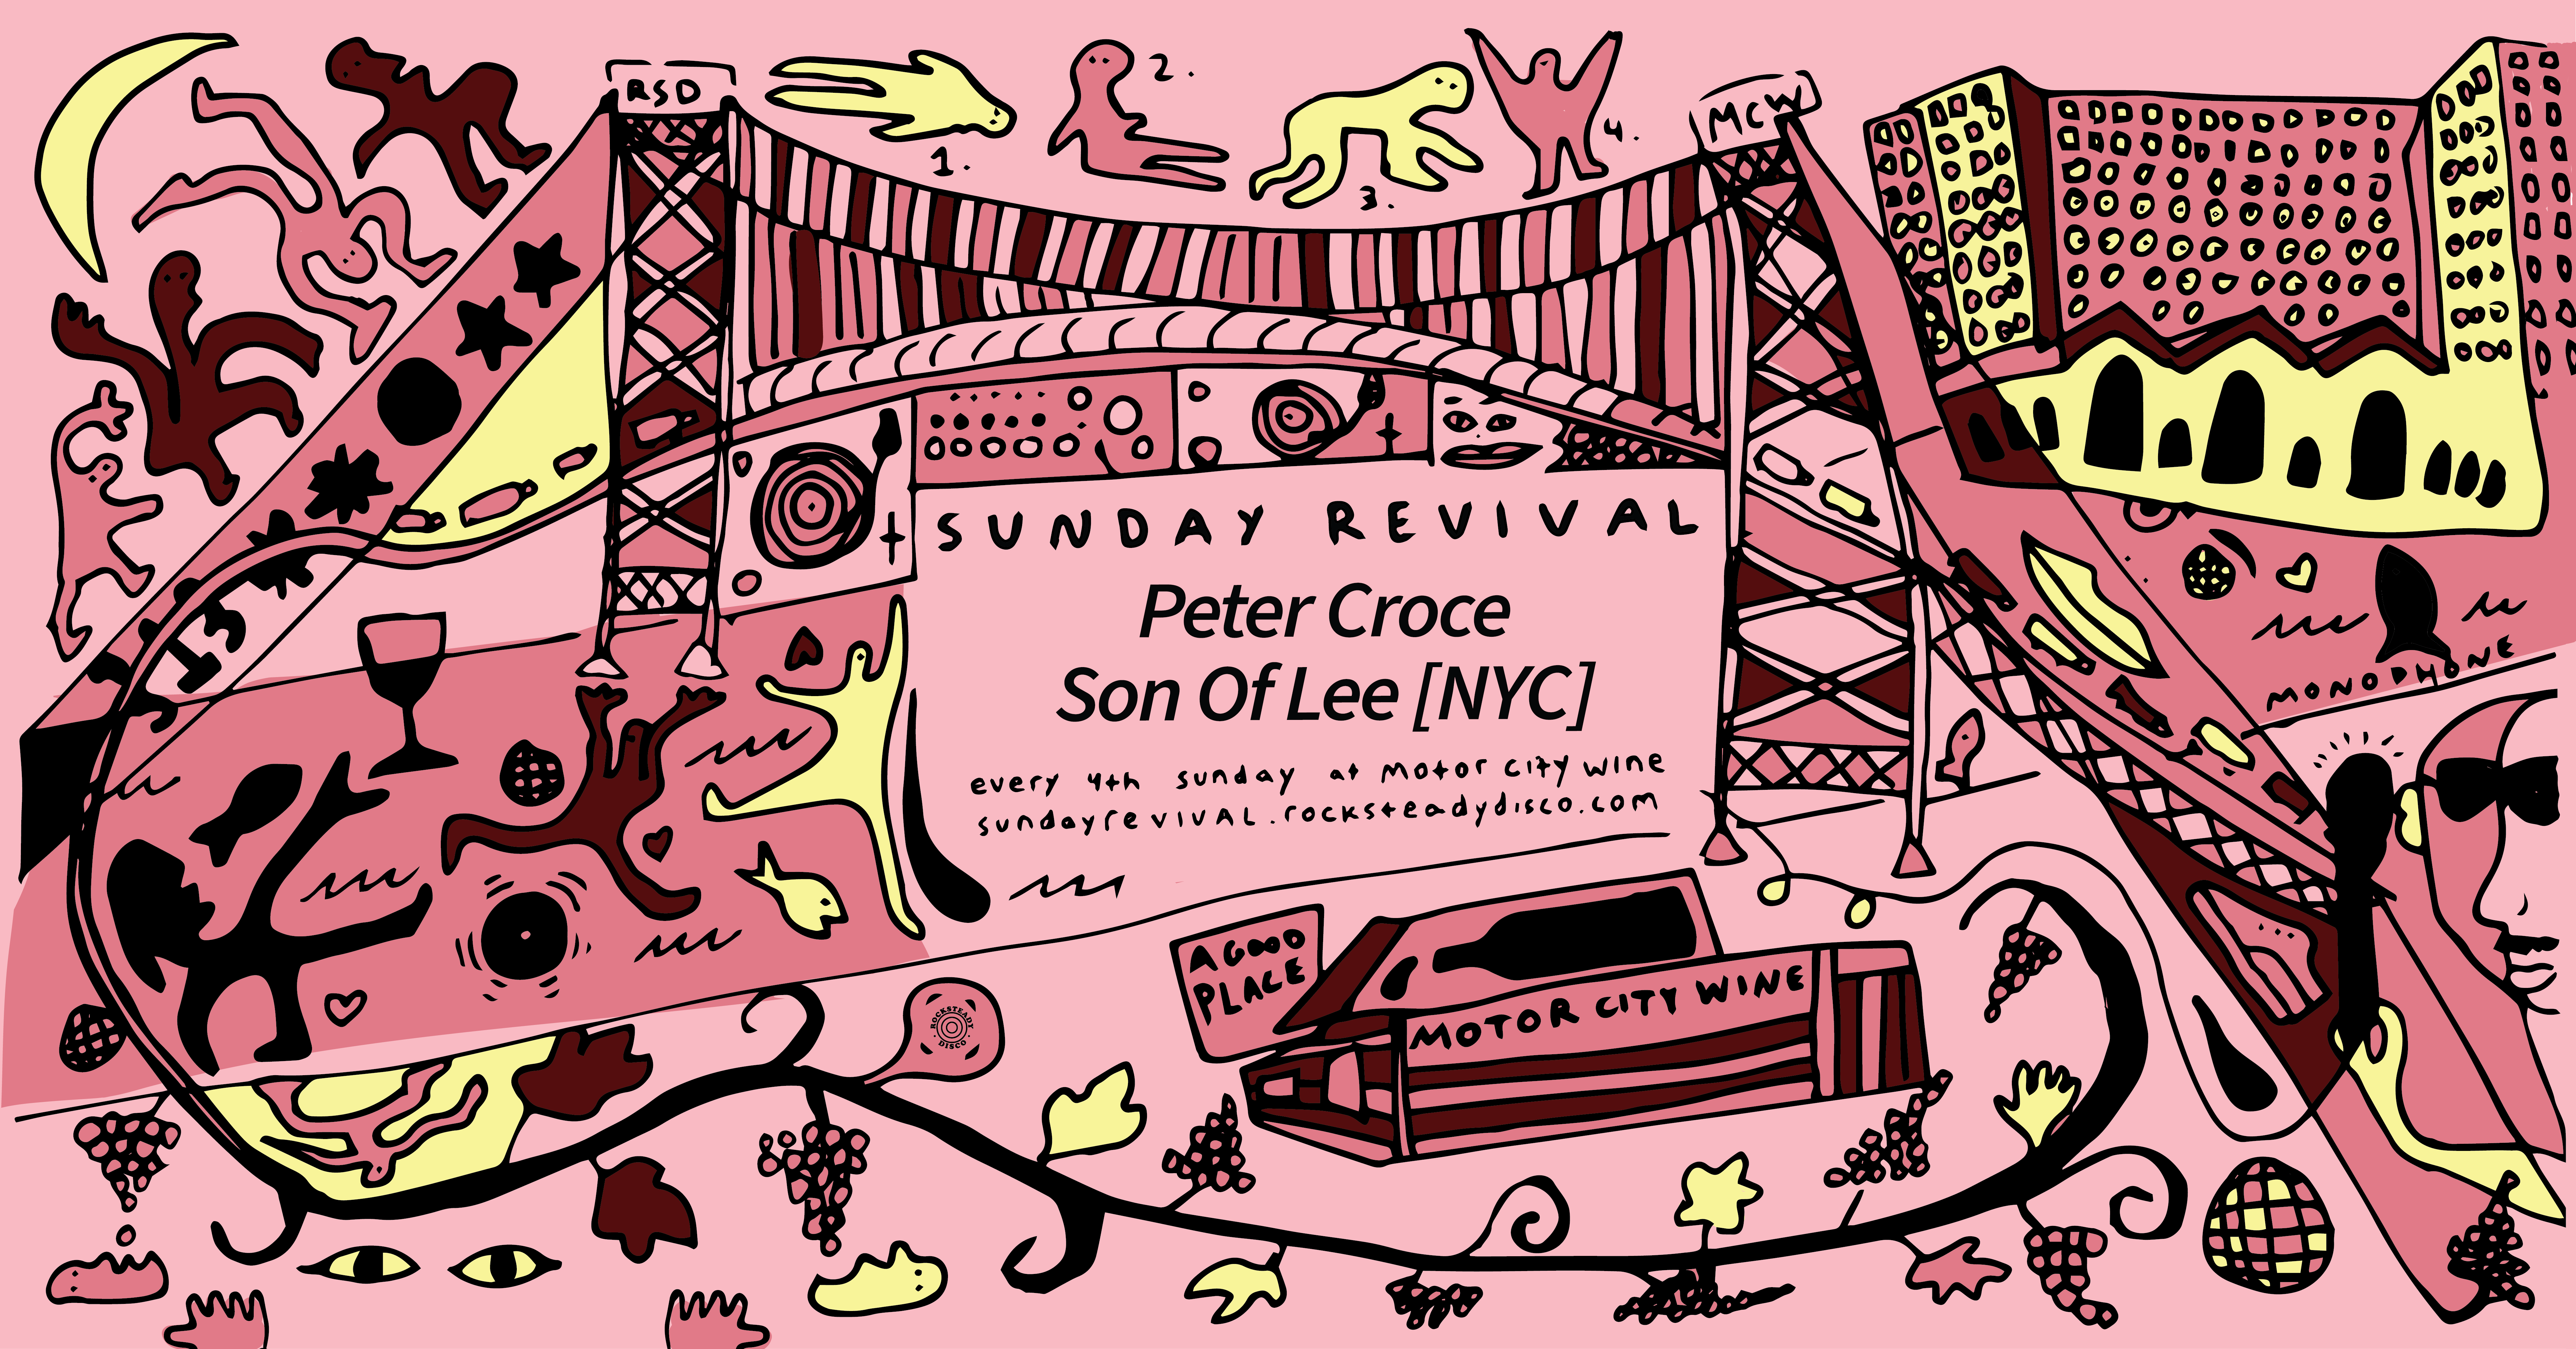 Sunday Revival w Son Of Lee [NYC] & Peter Croce - Página frontal